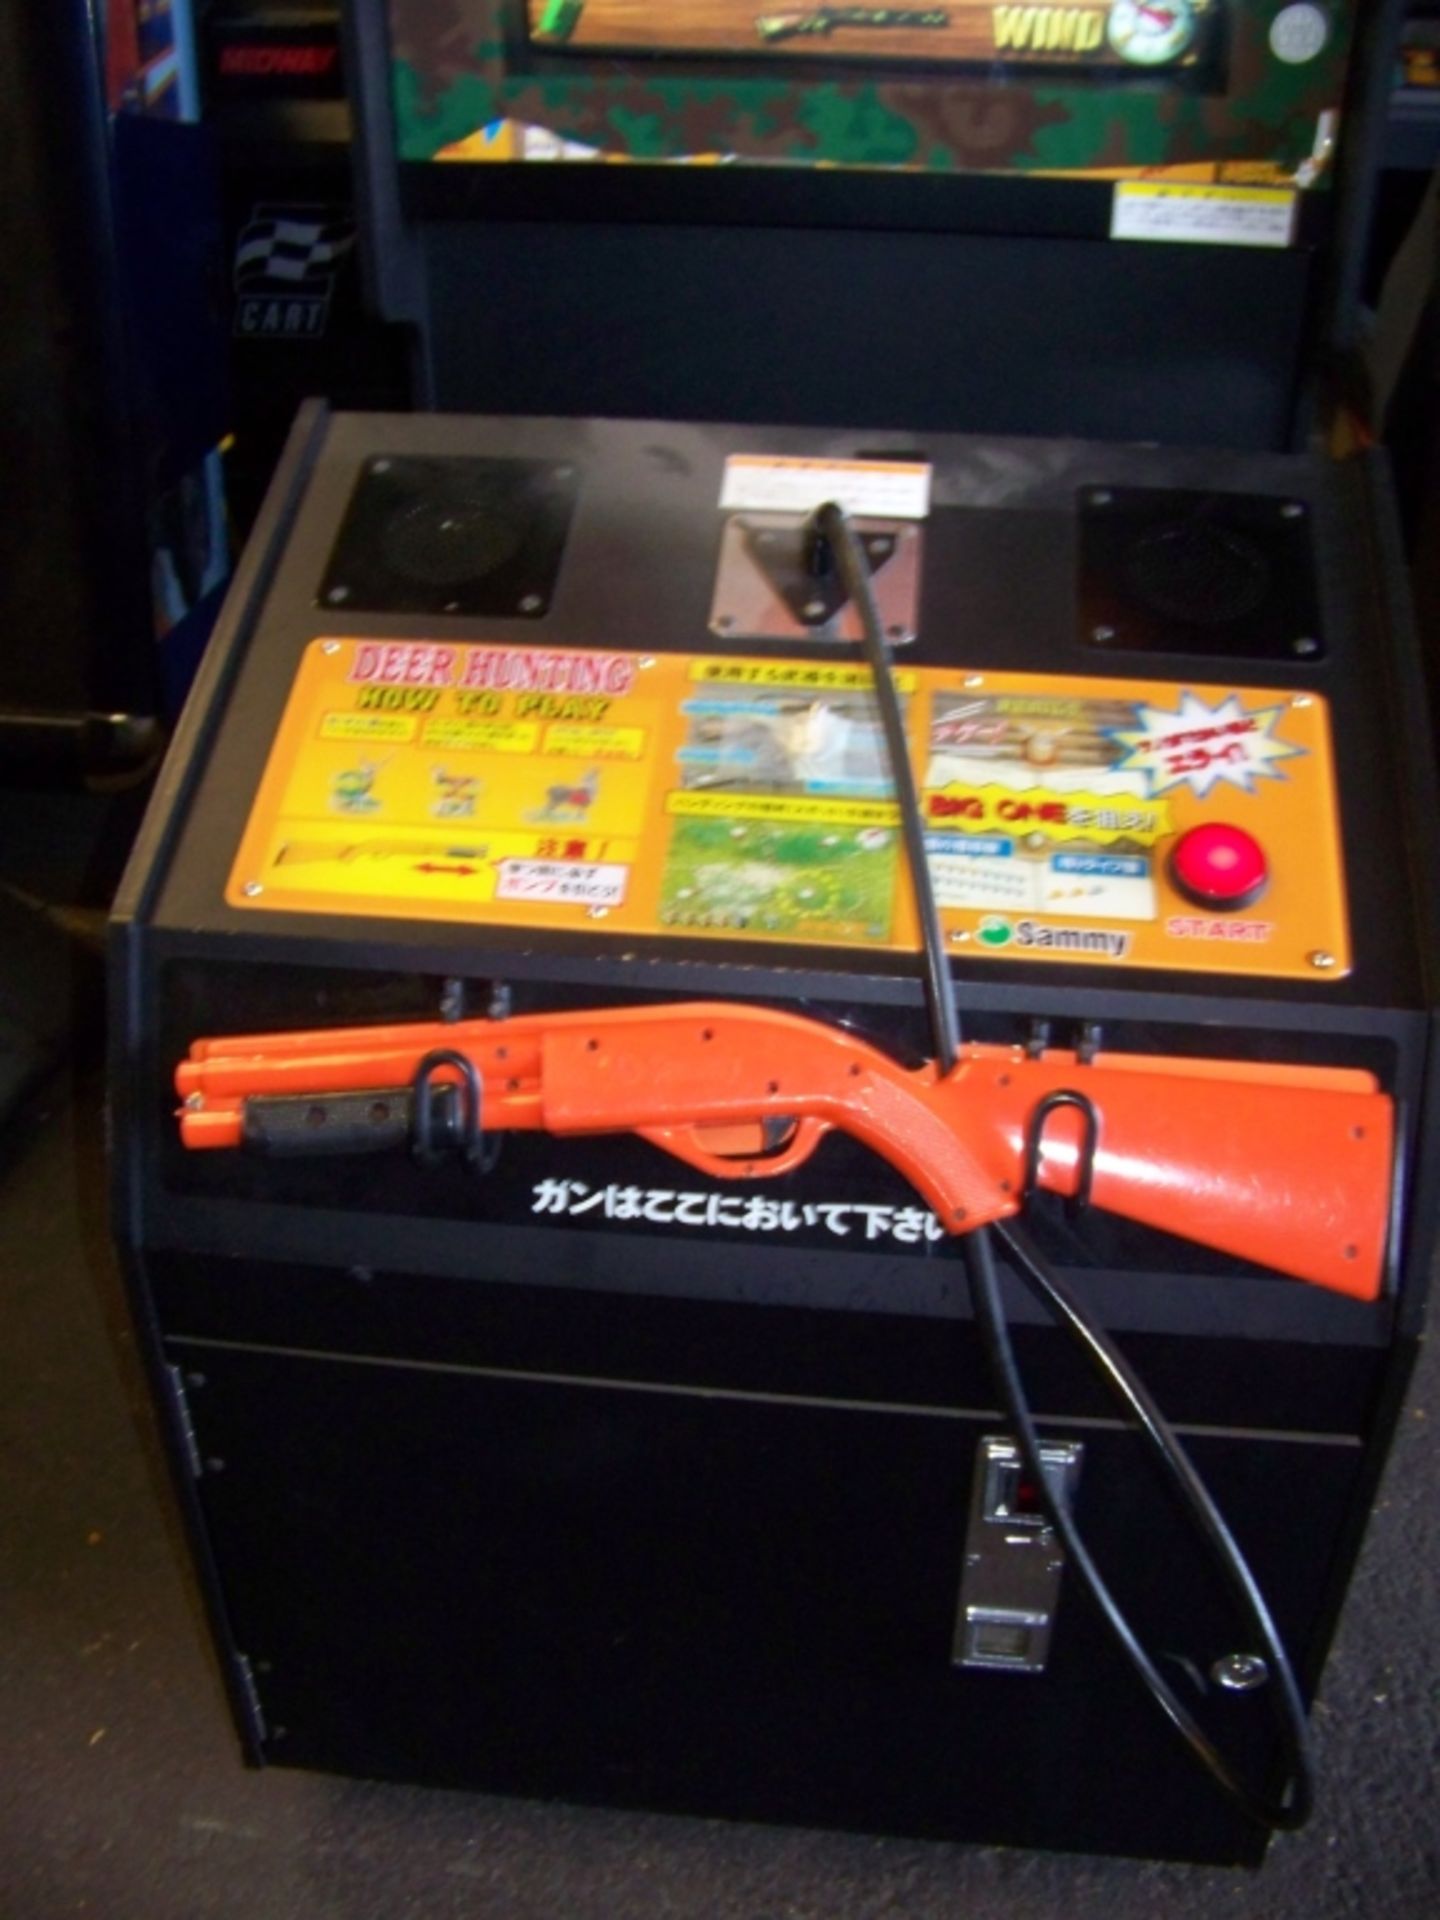 WORLD HUNTING SERIES SHOOTER ARCADE GAME SAMMY JP Item is in used condition. Evidence of wear and - Image 4 of 4